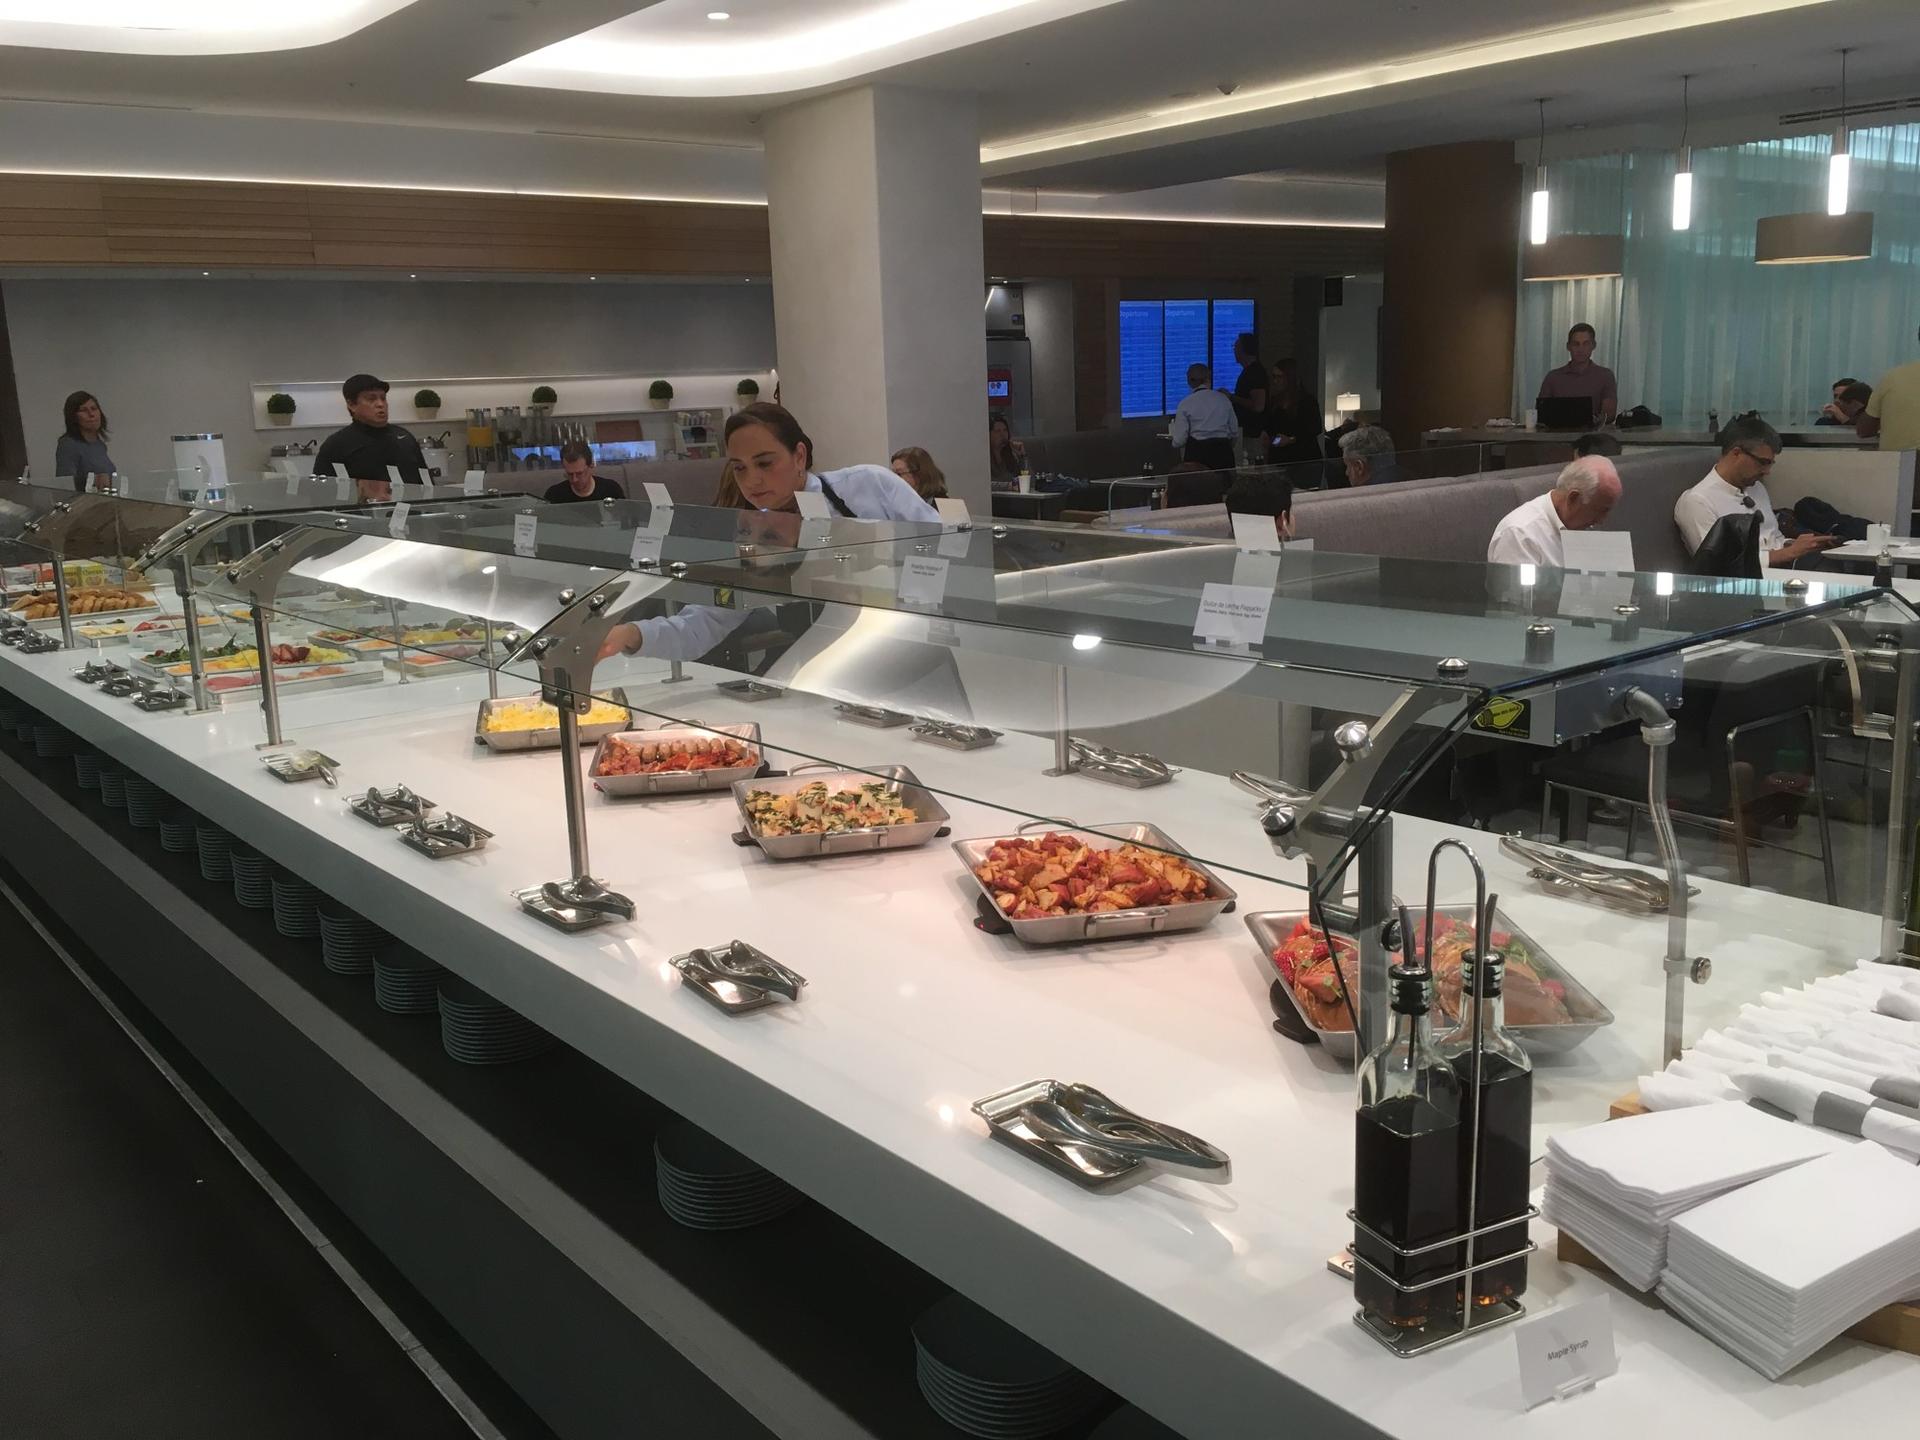 American Airlines Flagship First Dining image 5 of 5